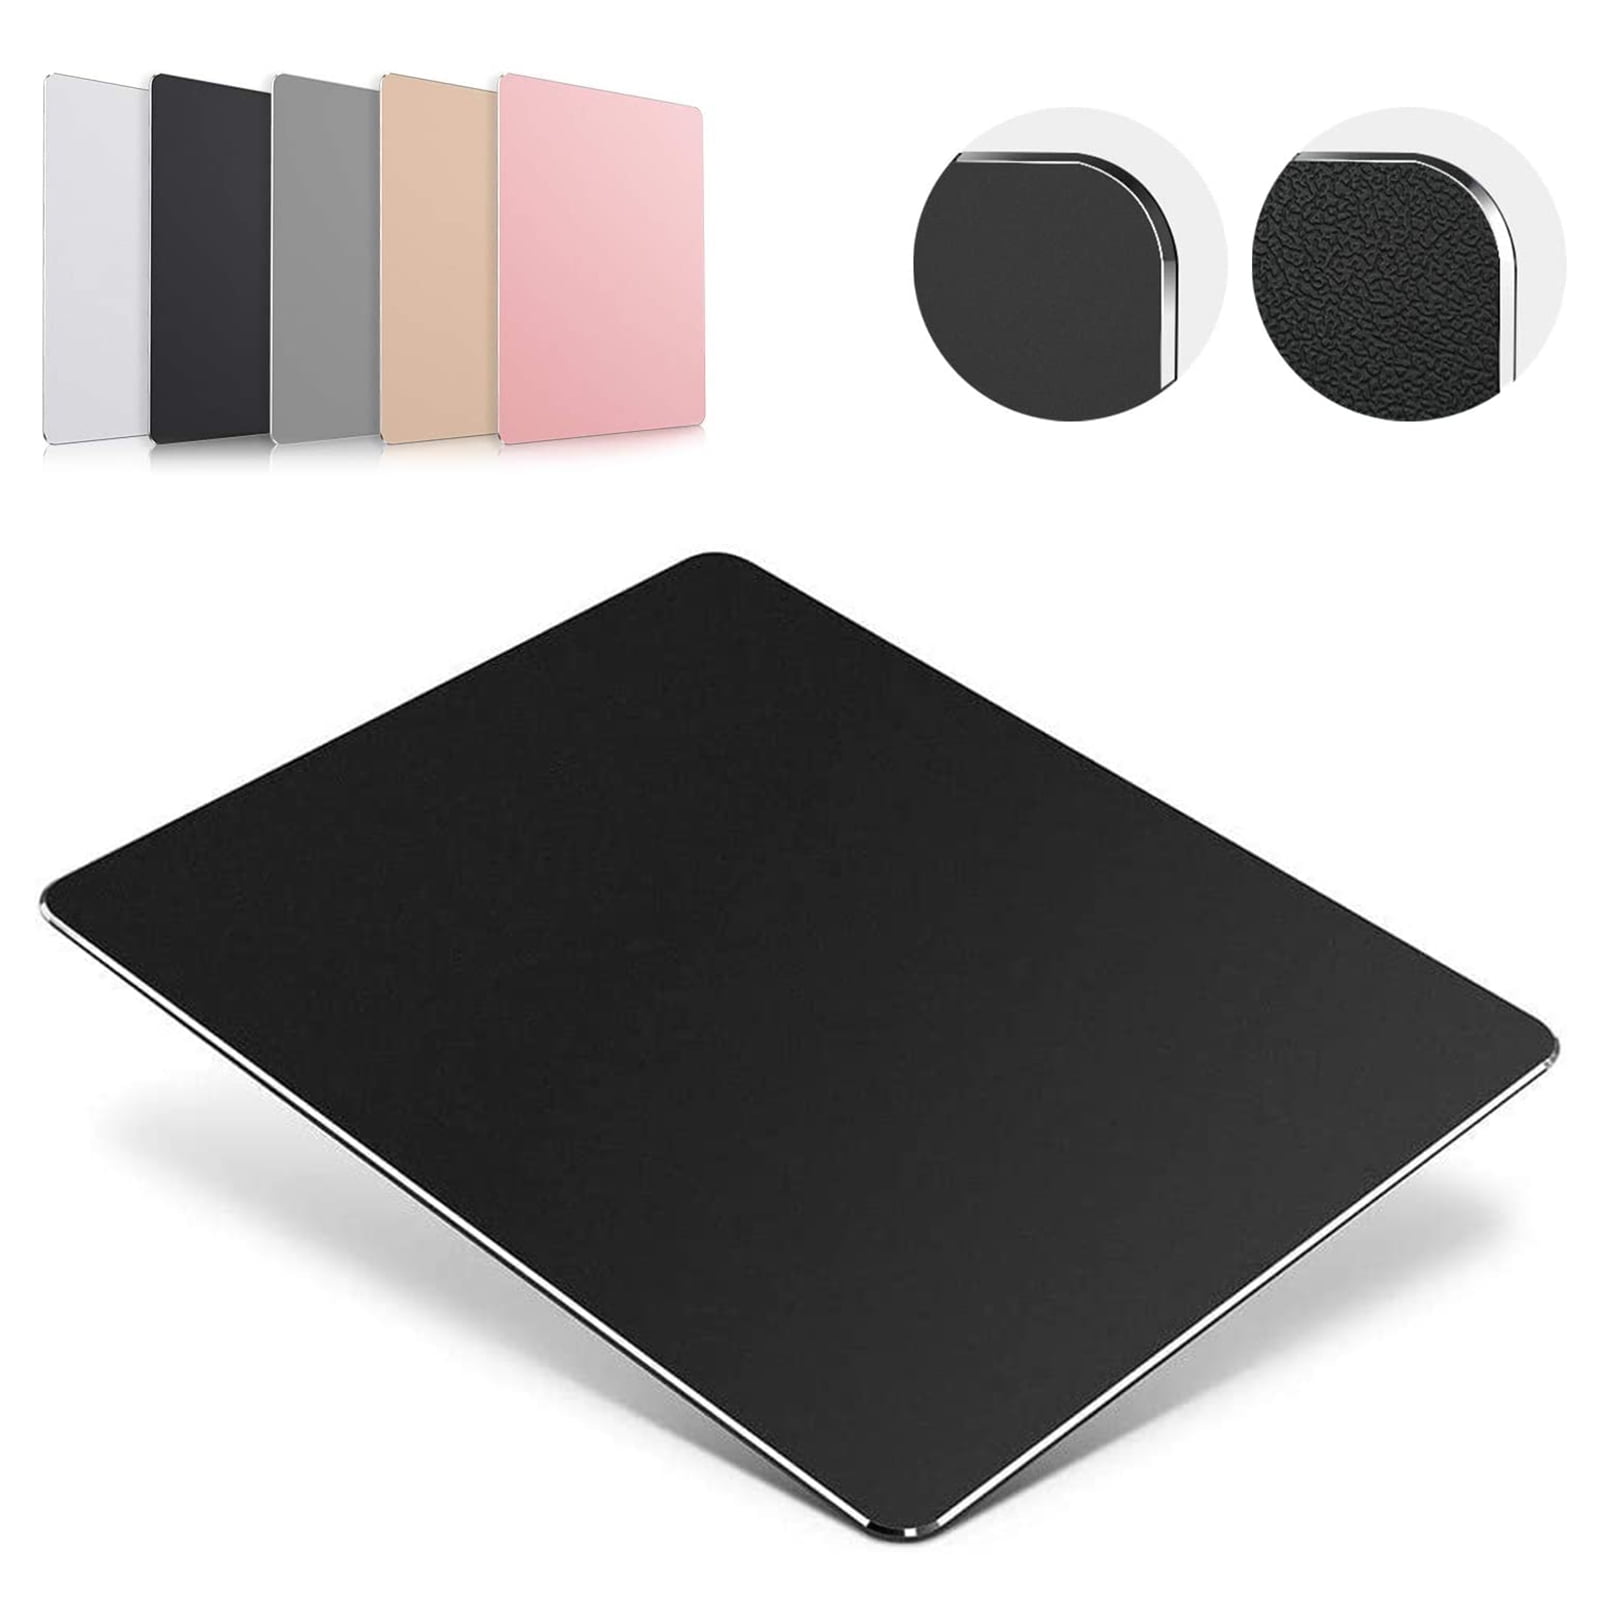 Pretty Cute Mouse Pad for Office Home Gaming Laptop Men Women Kid,Brown&Grey Anti-Slip Waterproof Mouse Mat Hsurbtra Mouse Pad Double-Sided PU Leather Small Round Mousepad 8.7 x 8.7 Inch